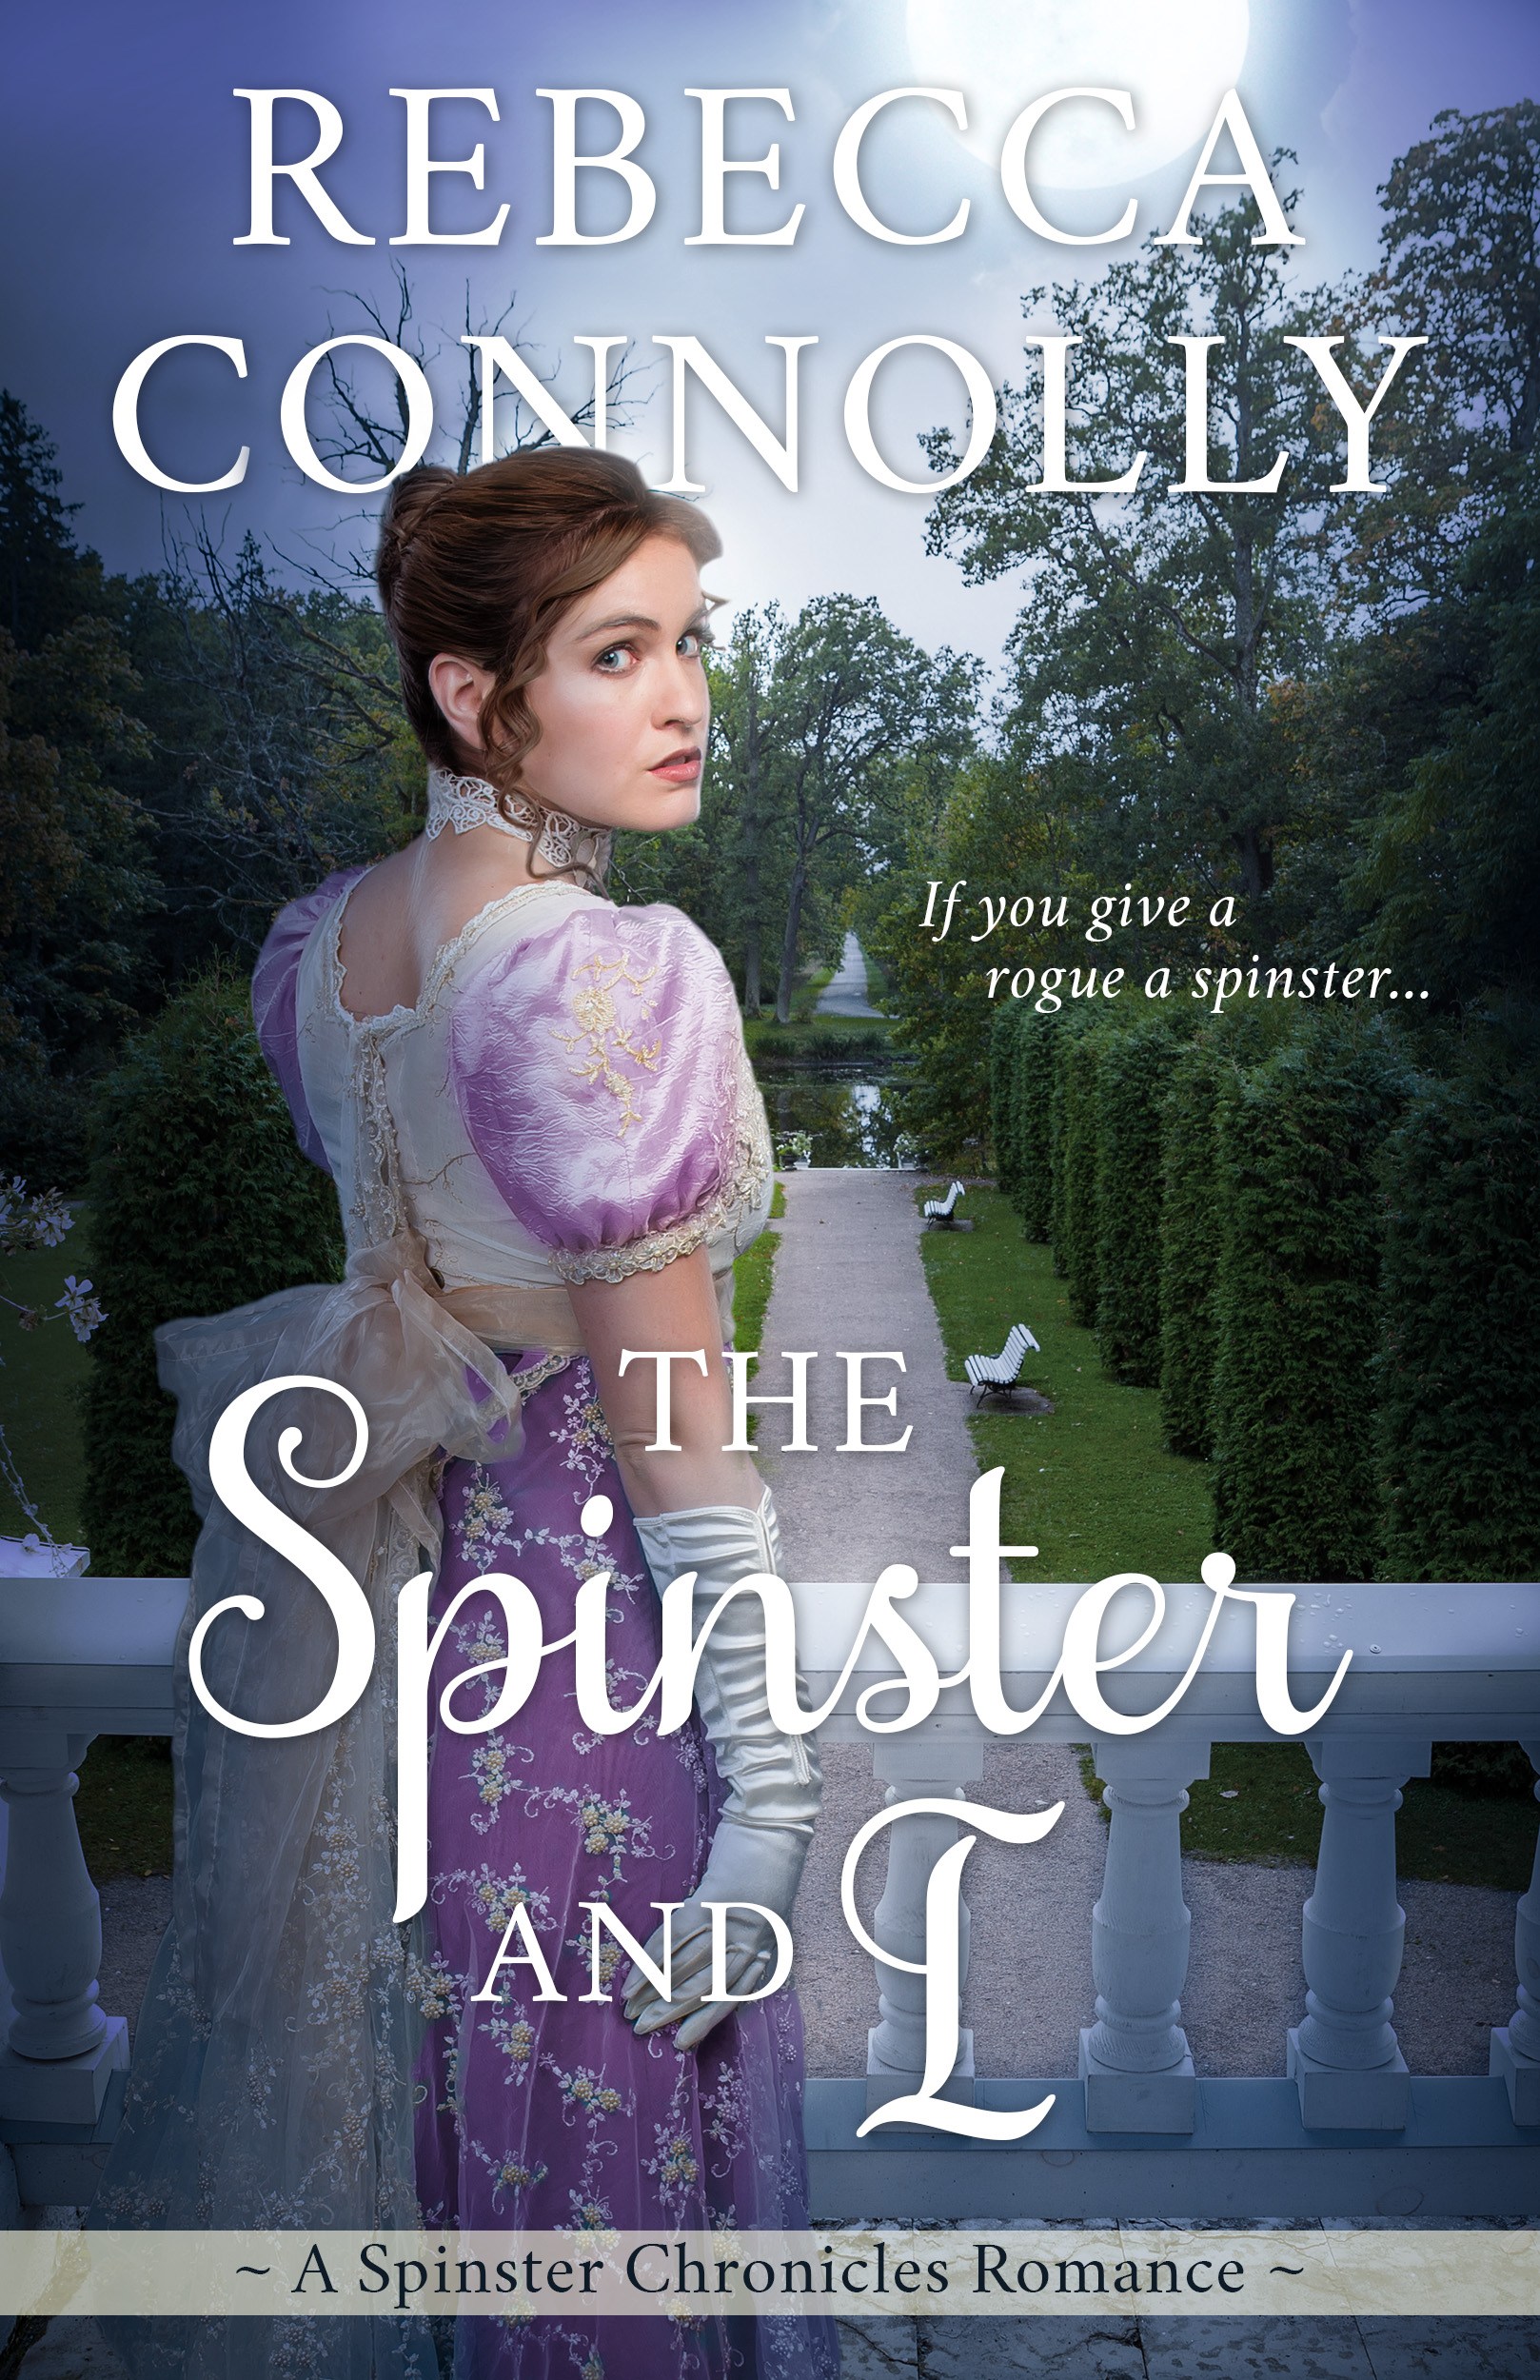 12 Days of Clean Romance – Rebecca Connolly, author of The Spinster and I